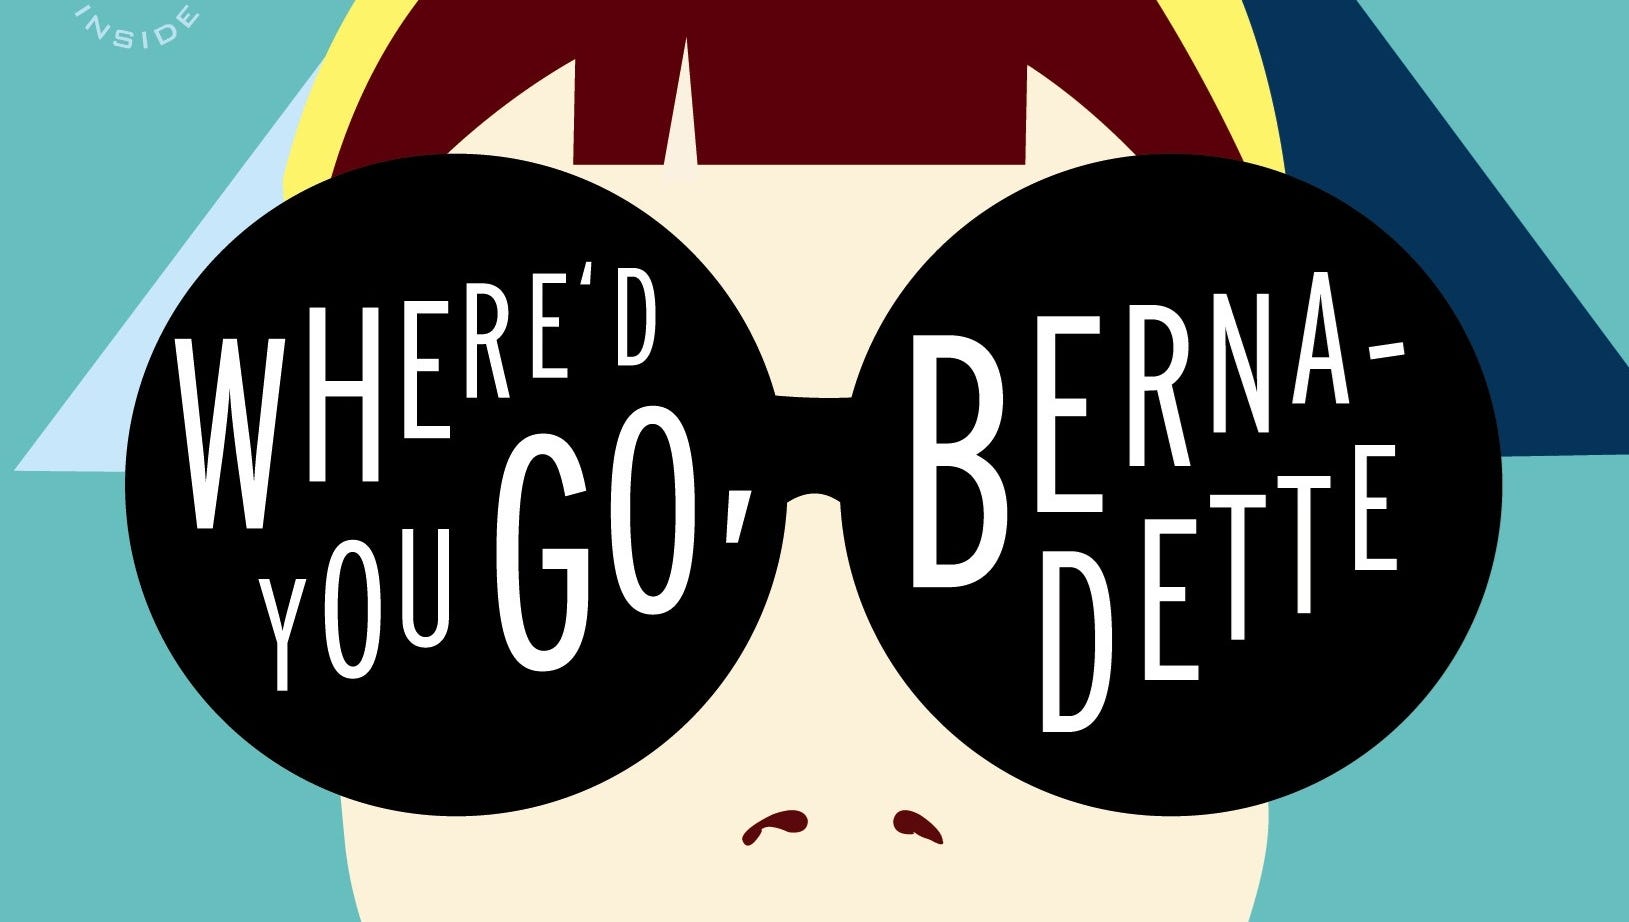 Where d you come from. Where'd you go. Bernadette 400 шрифт.